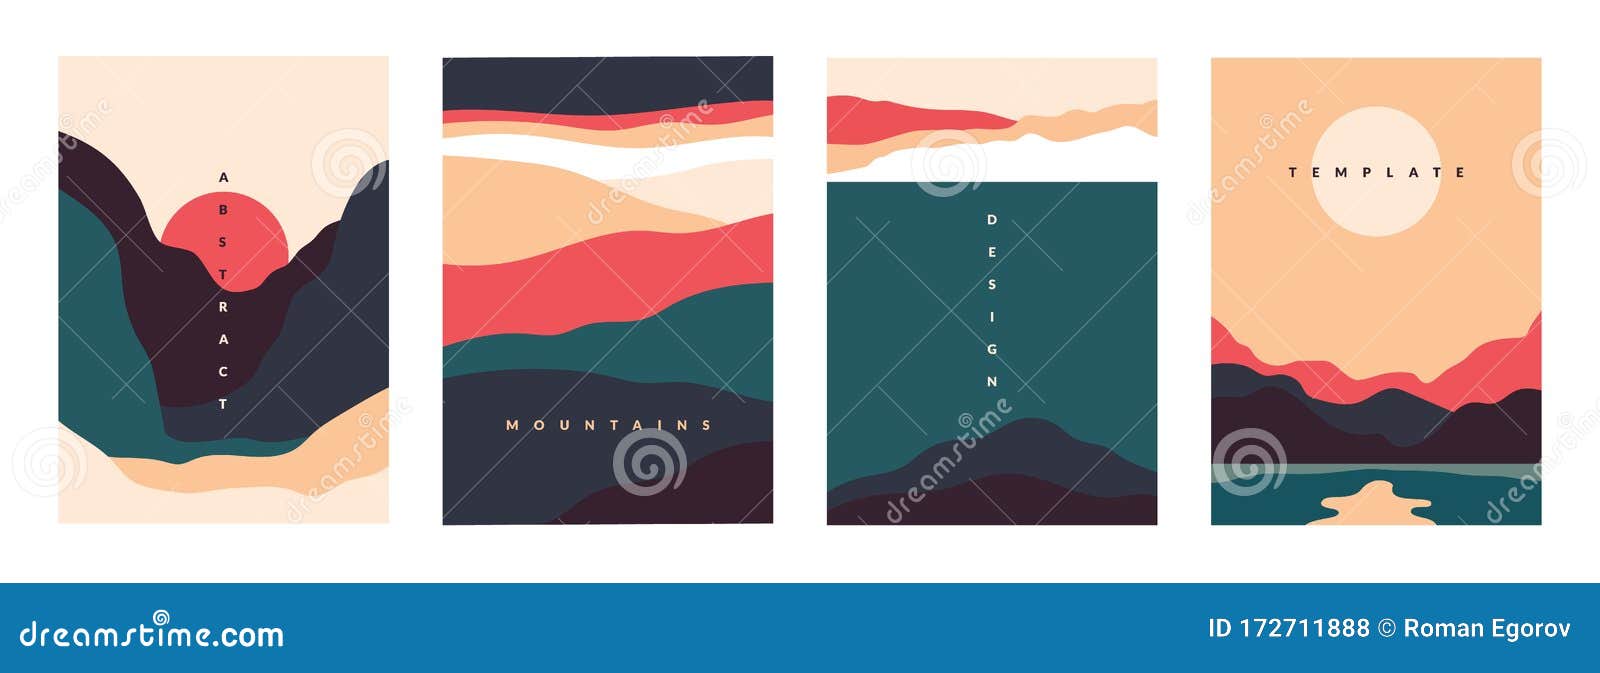 landscape minimal poster. abstract geometric banners with mountains lakes and waves.  travel and adventure flyers